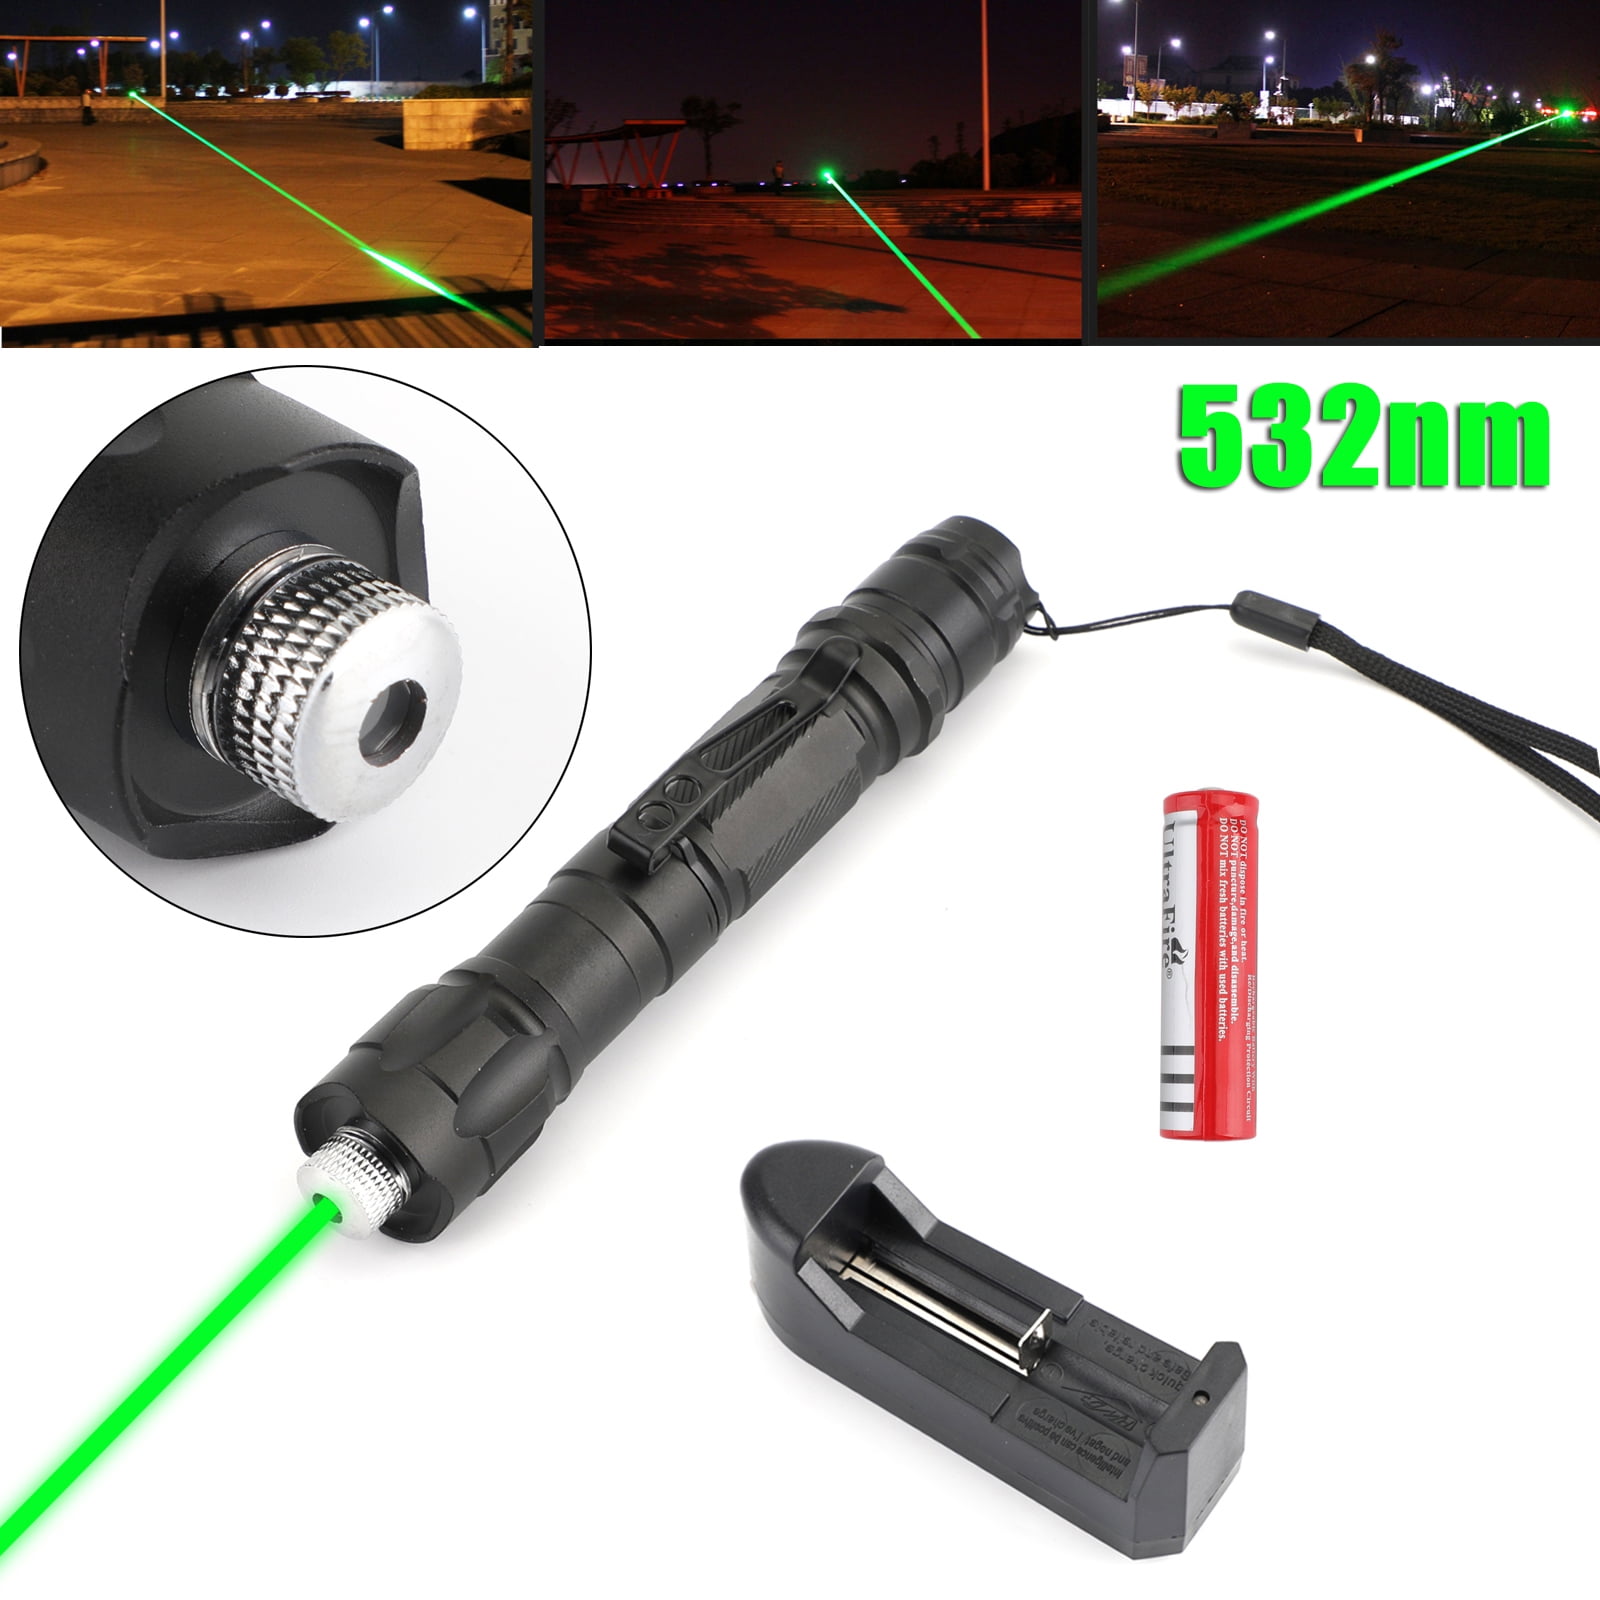 2In1 Star Cap Green Laser Pointer Portable 200Miles Visible Beam Lazer Pen AAA 